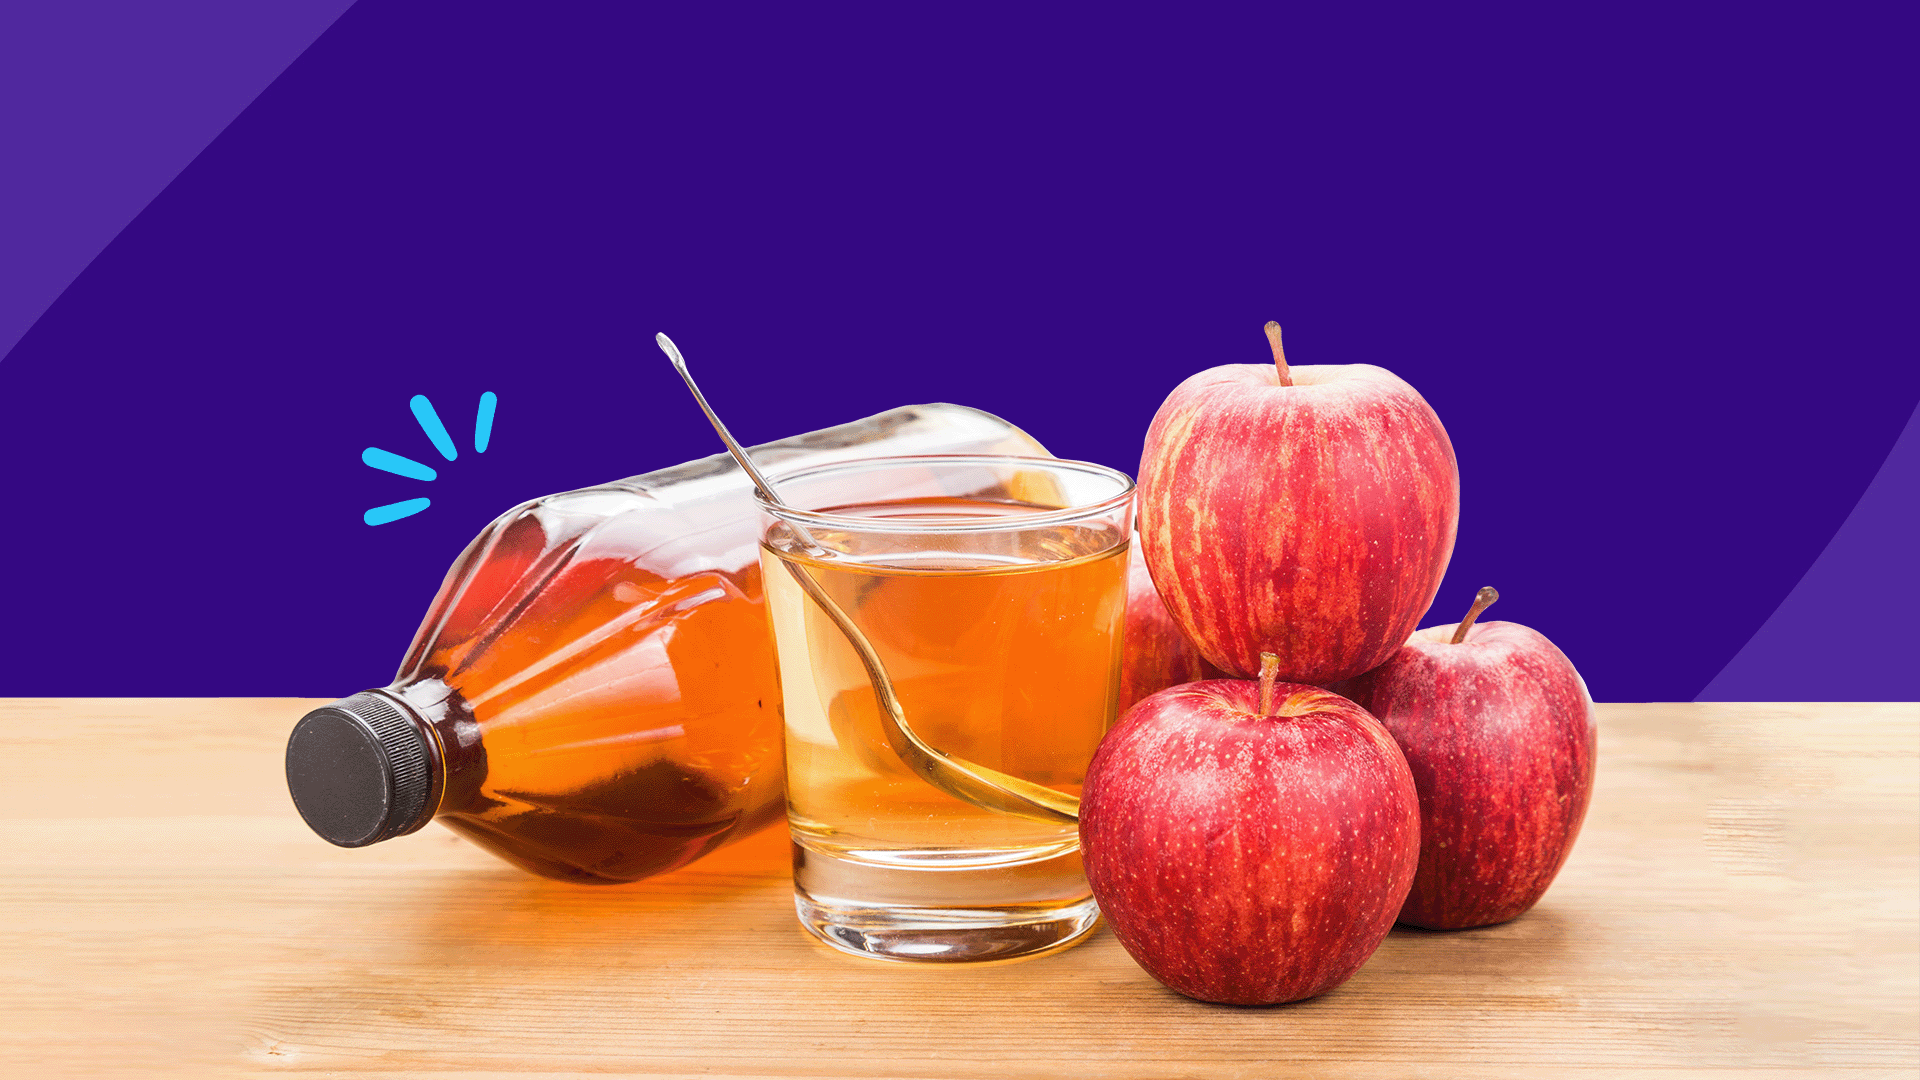 8 health benefits of apple cider vinegar (with evidence to prove it)